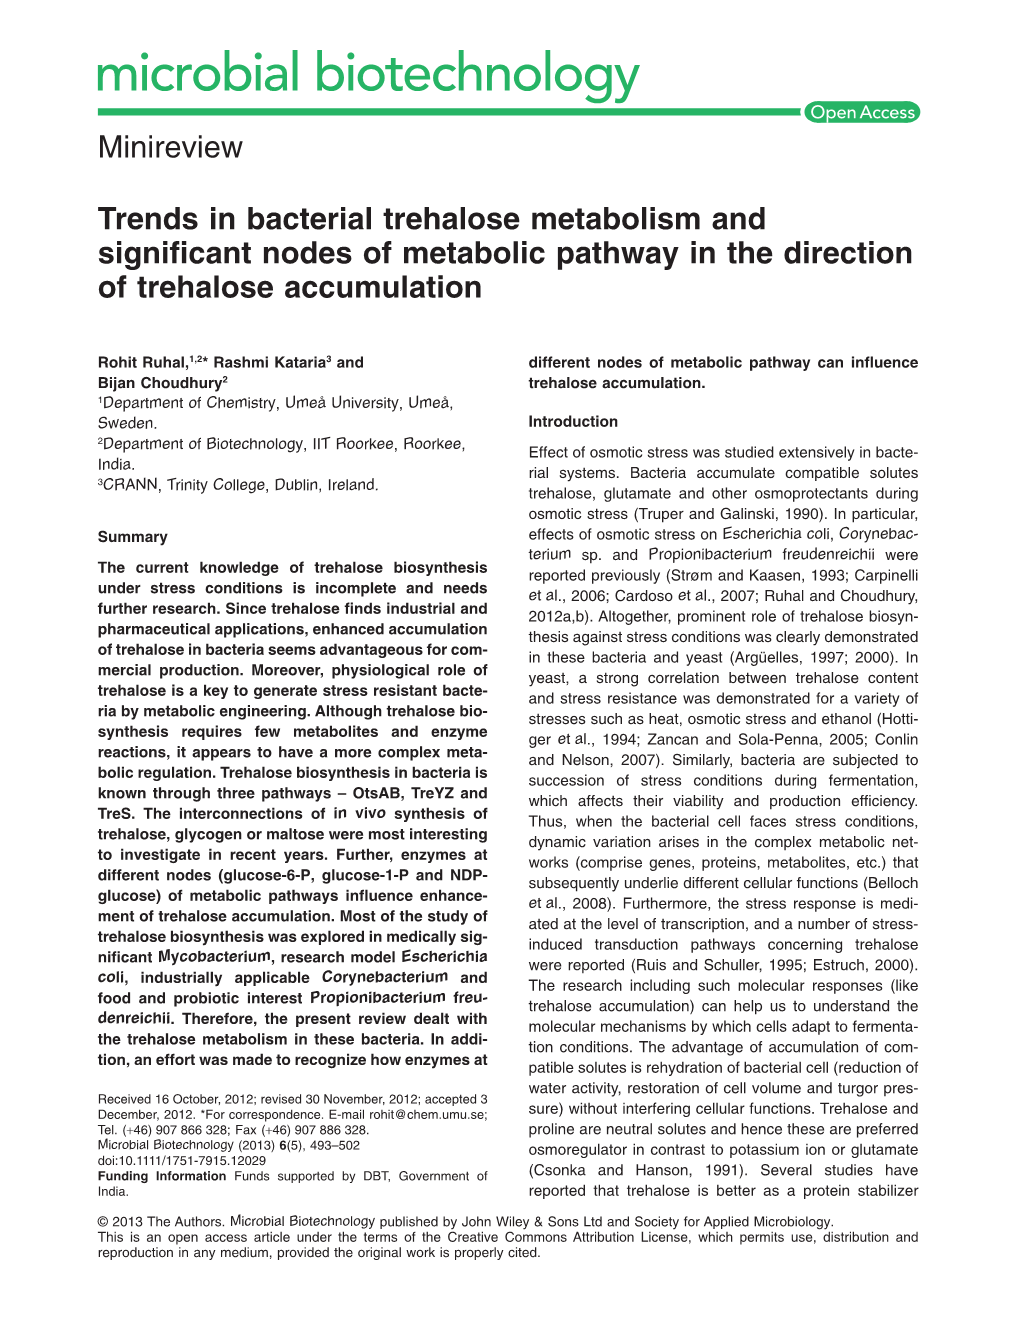 Trends in Bacterial Trehalose Metabolism and Significant Nodes of Metabolic Pathway in the Direction of Trehalose Accumulation